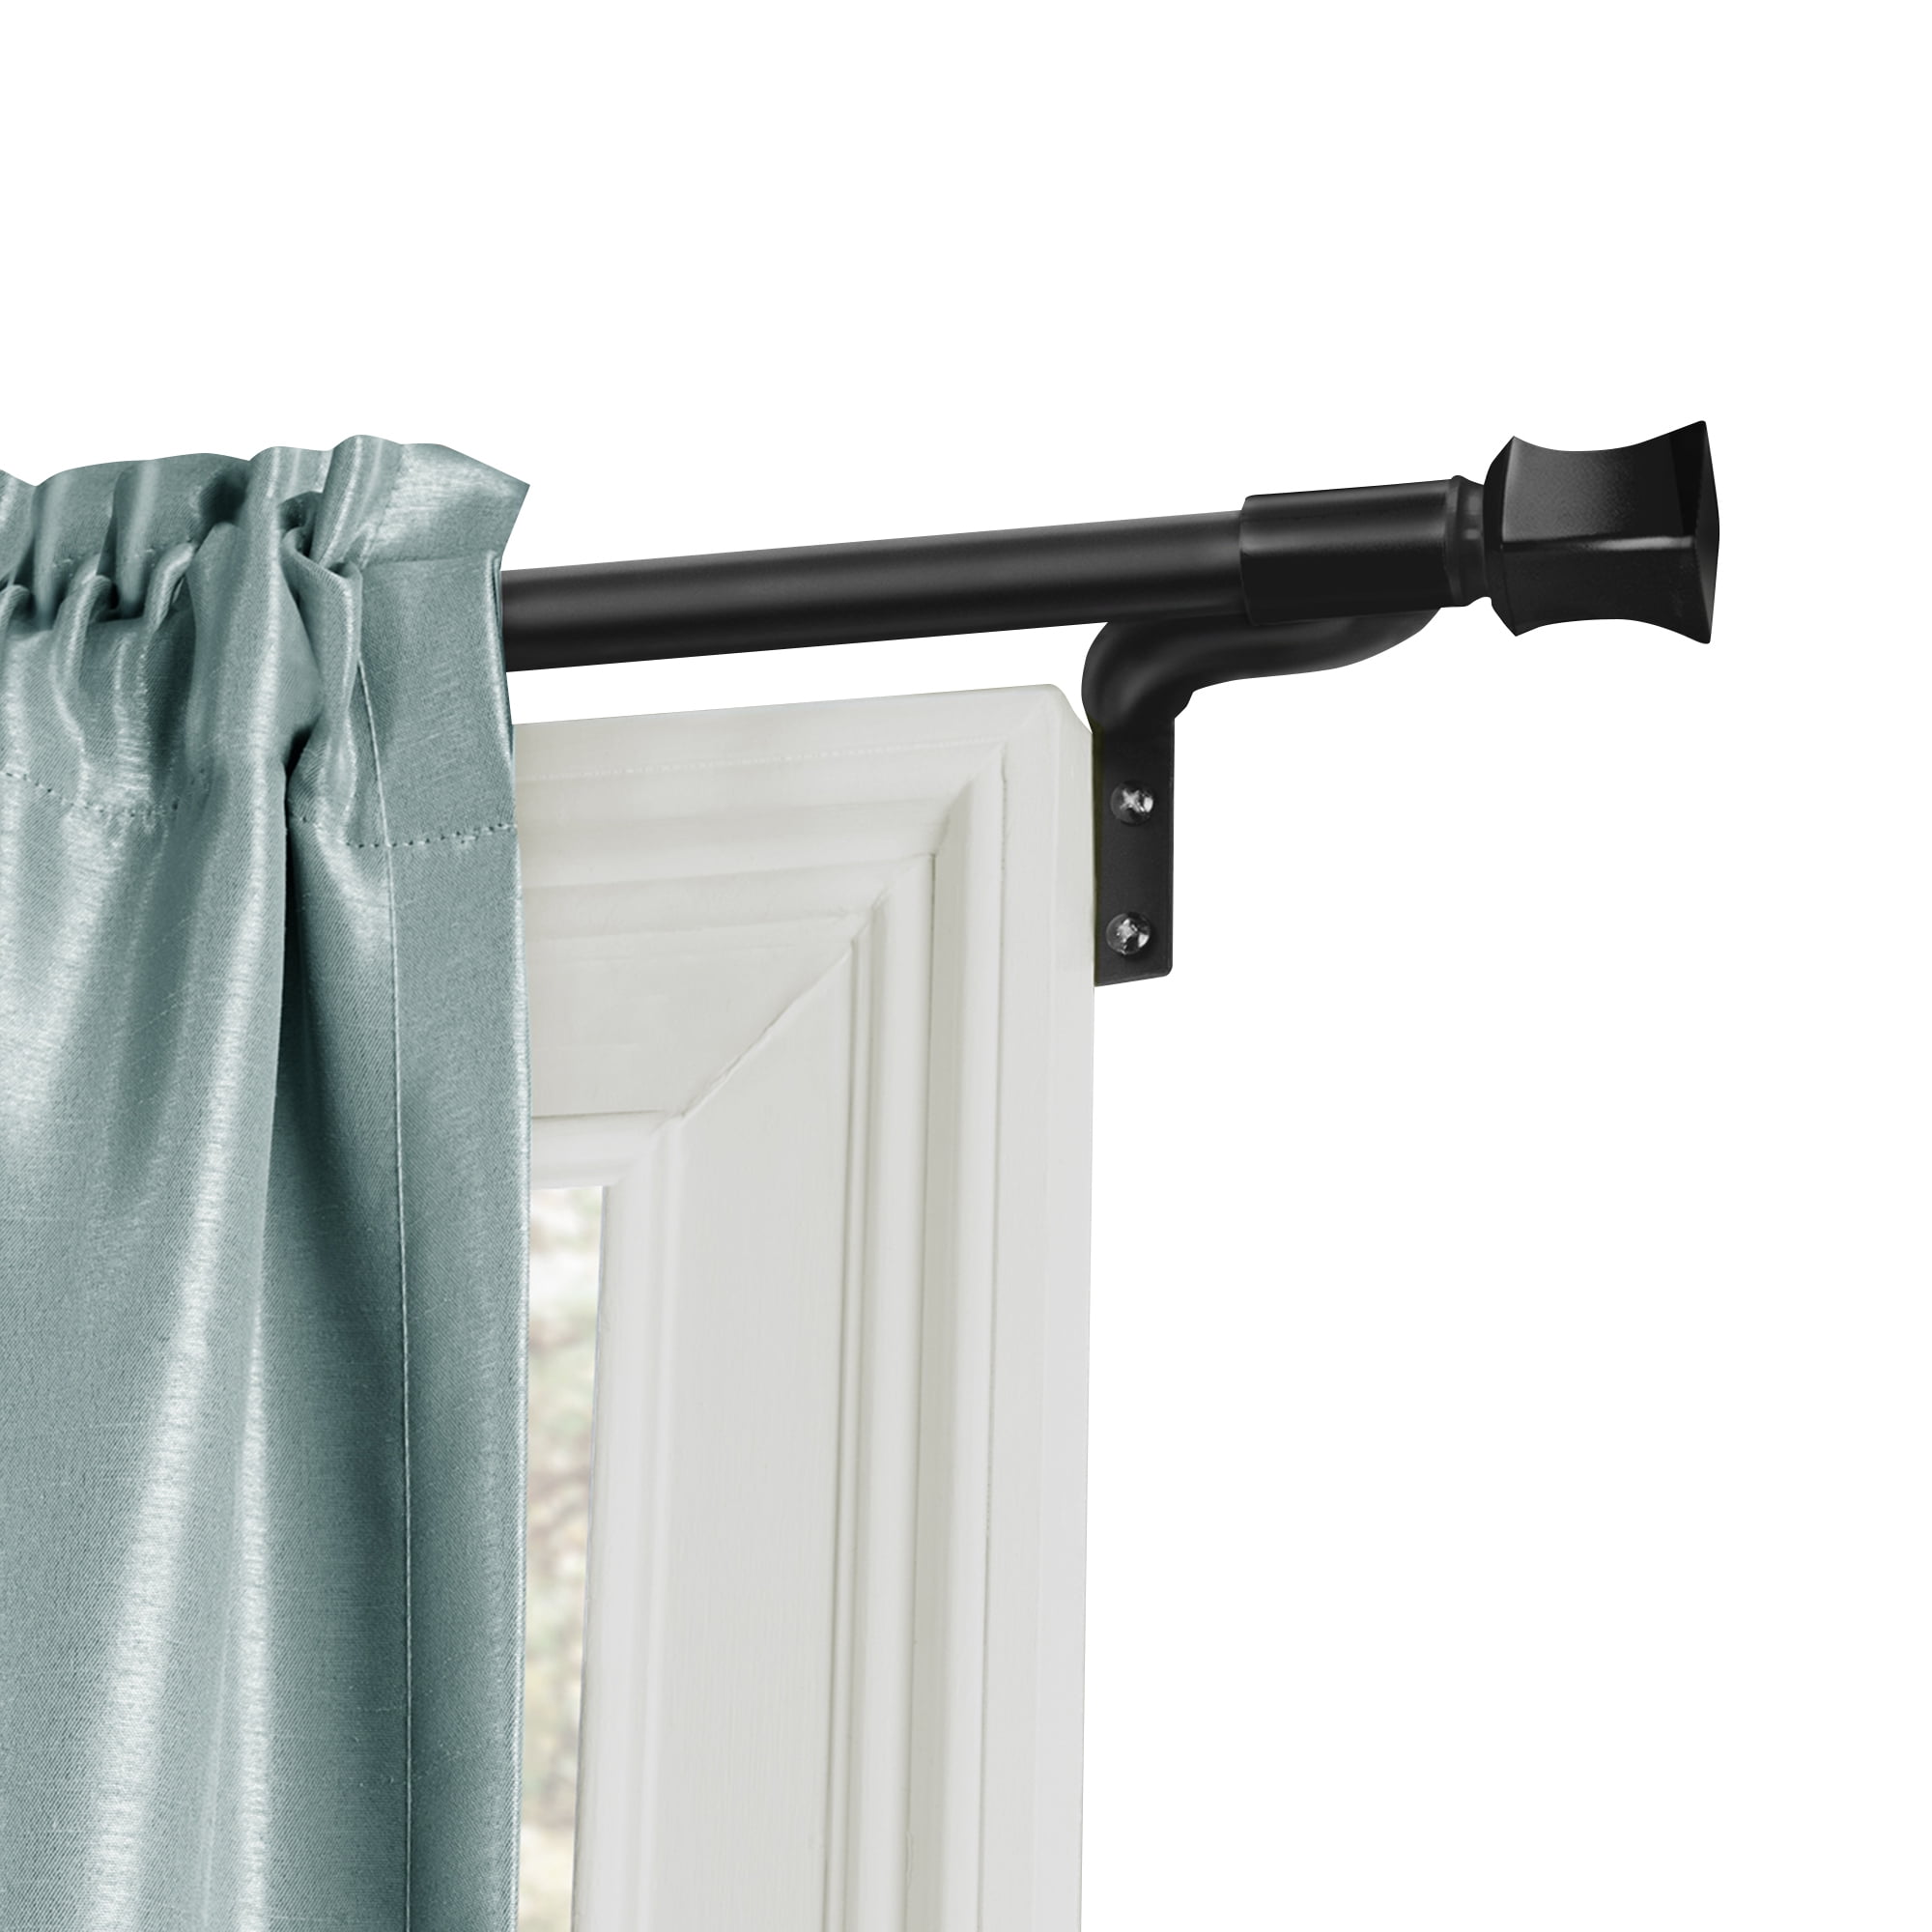 Mainstays Spring Tension Window Curtain Rod 7/16' Diameter for sale online 